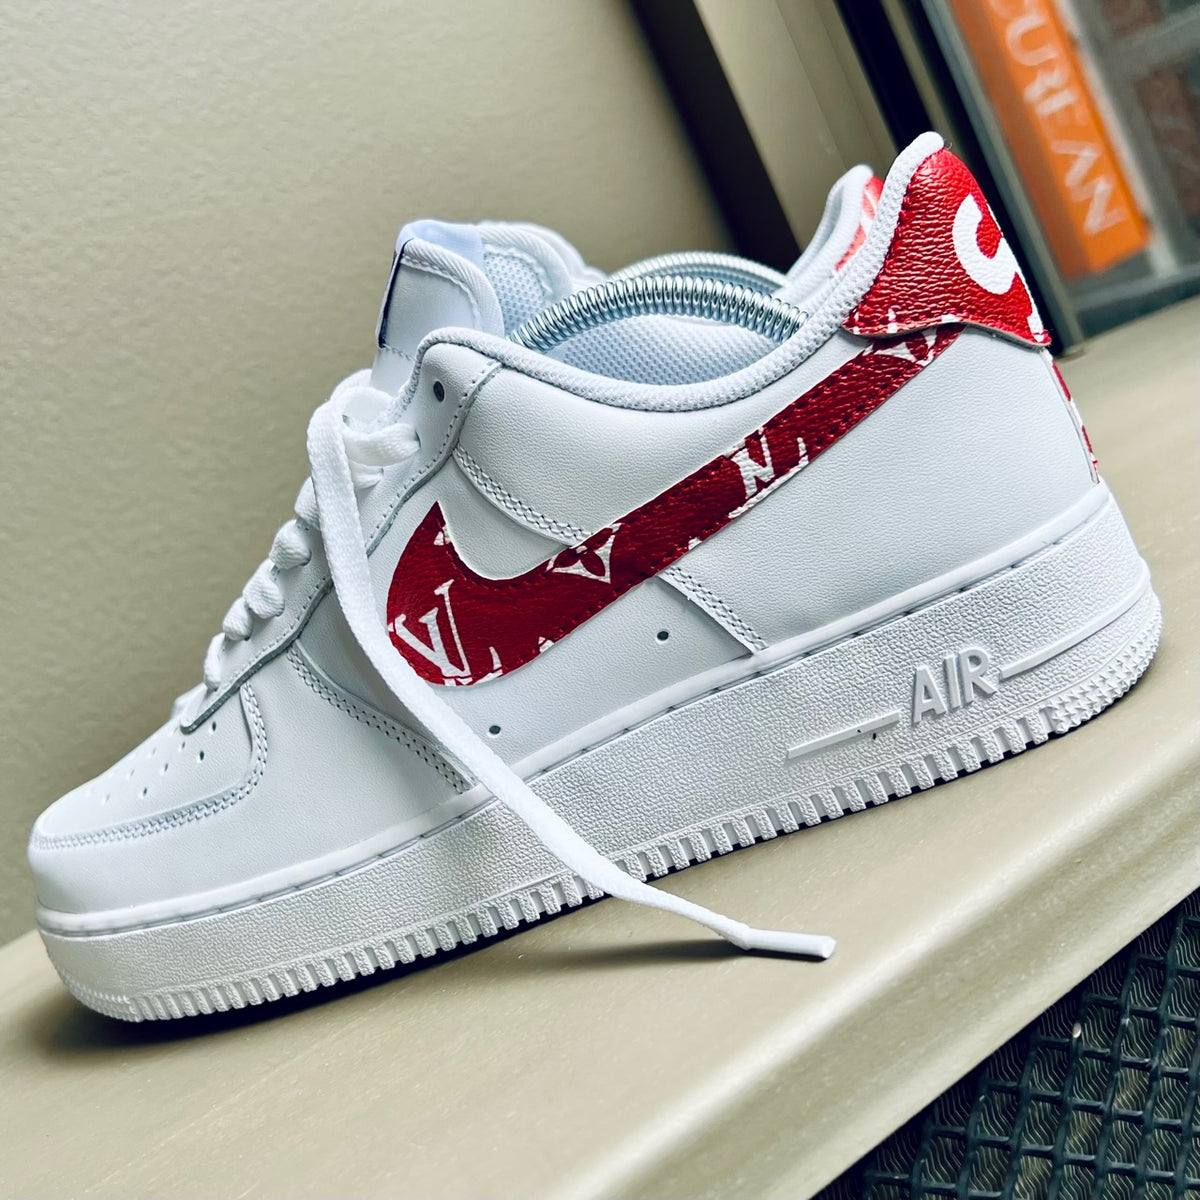 Louis Vuitton x Nike Air Force 1 Red | Size 8.5